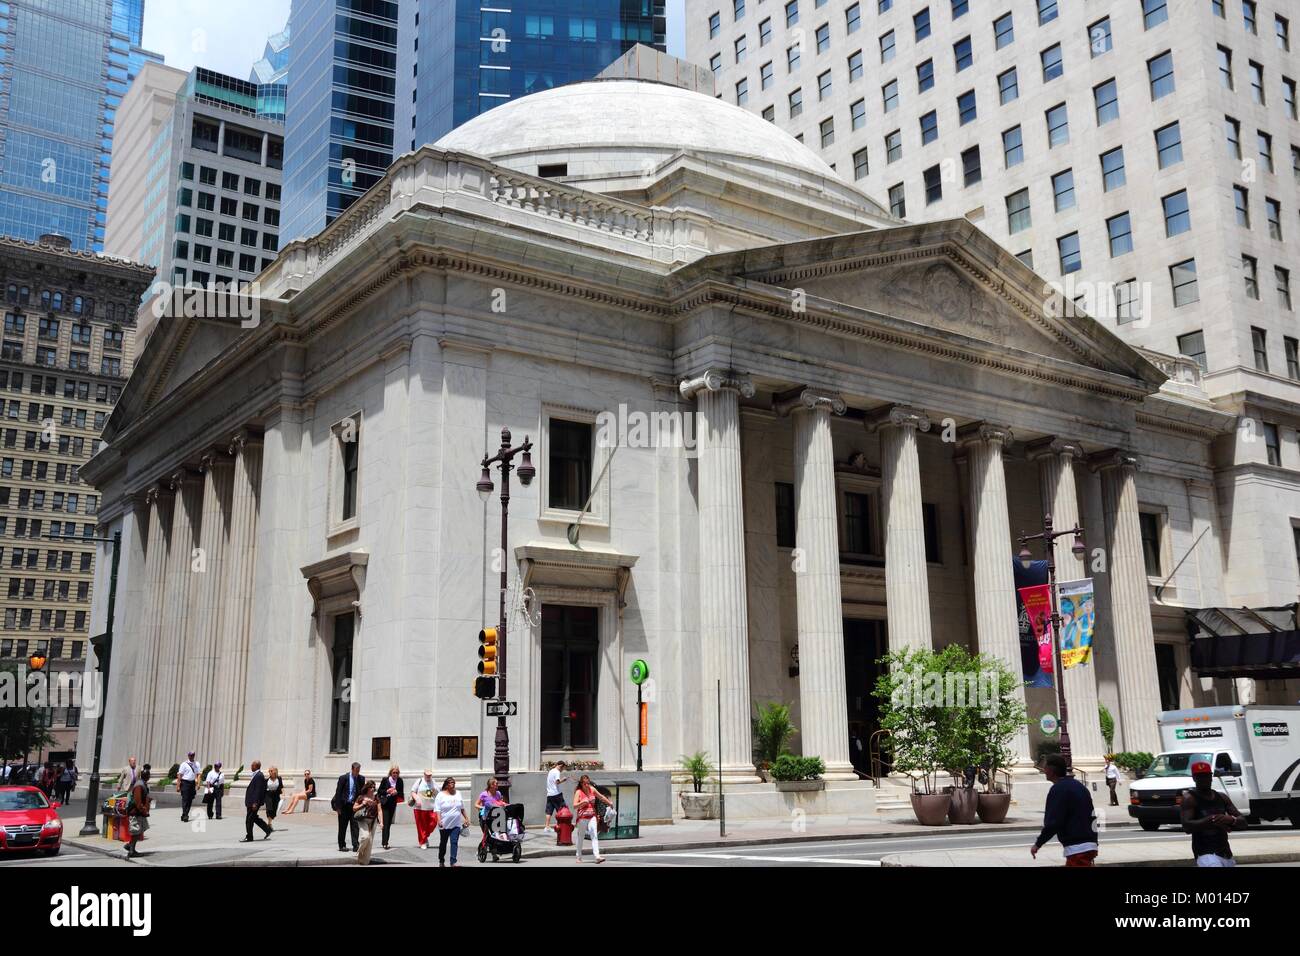 PHILADELPHIA - JUNE 11: People walk past old Girard Bank on June 11, 2013 in Philadelphia. As of 2012 Philadelphia is the 5th most populous city in th Stock Photo